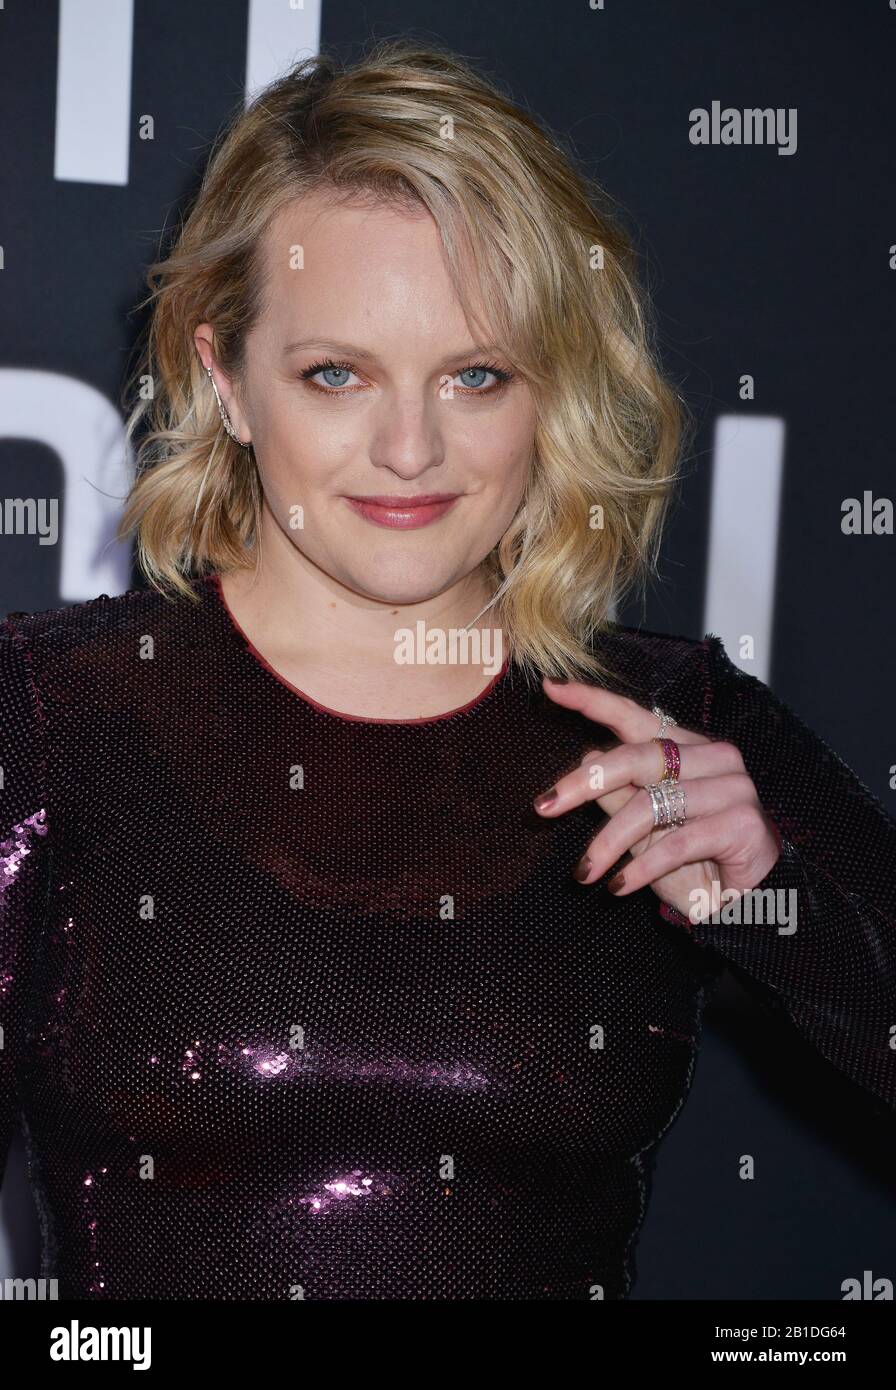 Los Angeles, USA. 25th Feb, 2020. Elizabeth Moss 024 attends the Premiere of Universal Pictures' "The Invisible Man" at TCL Chinese Theatre on February 24, 2020 in Hollywood, California Credit: Tsuni/USA/Alamy Live News Stock Photo